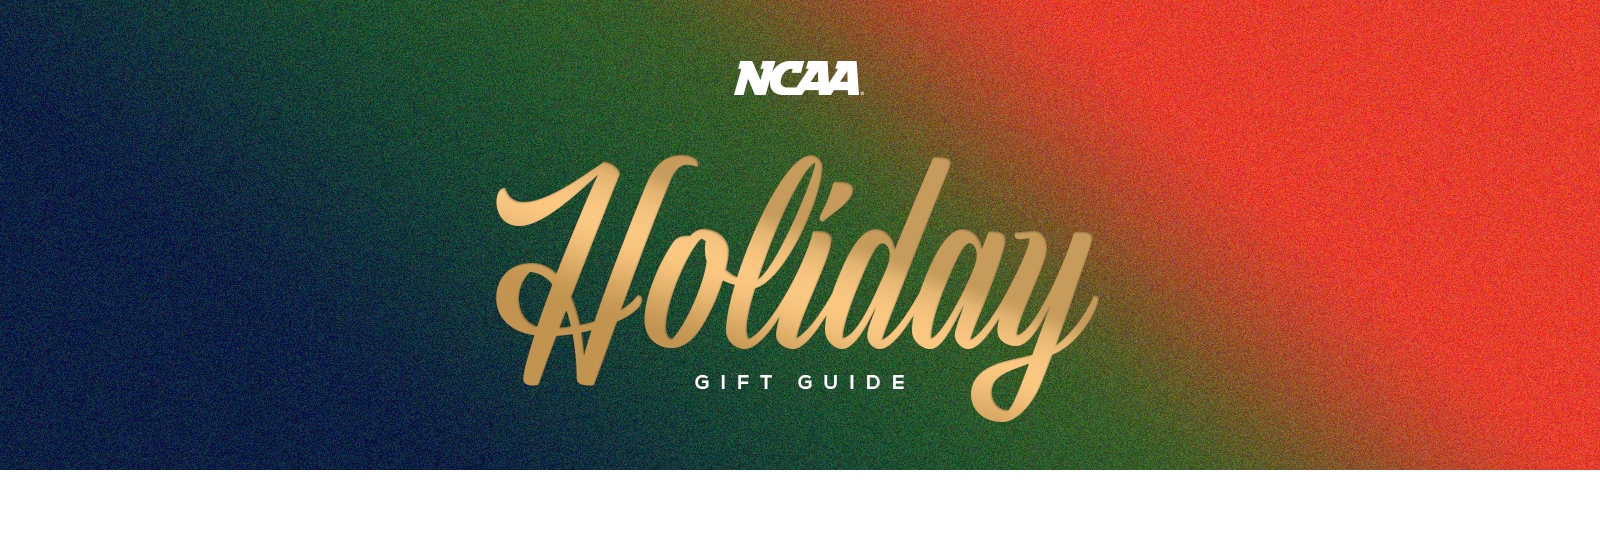 NCAA Holiday Gift Guide